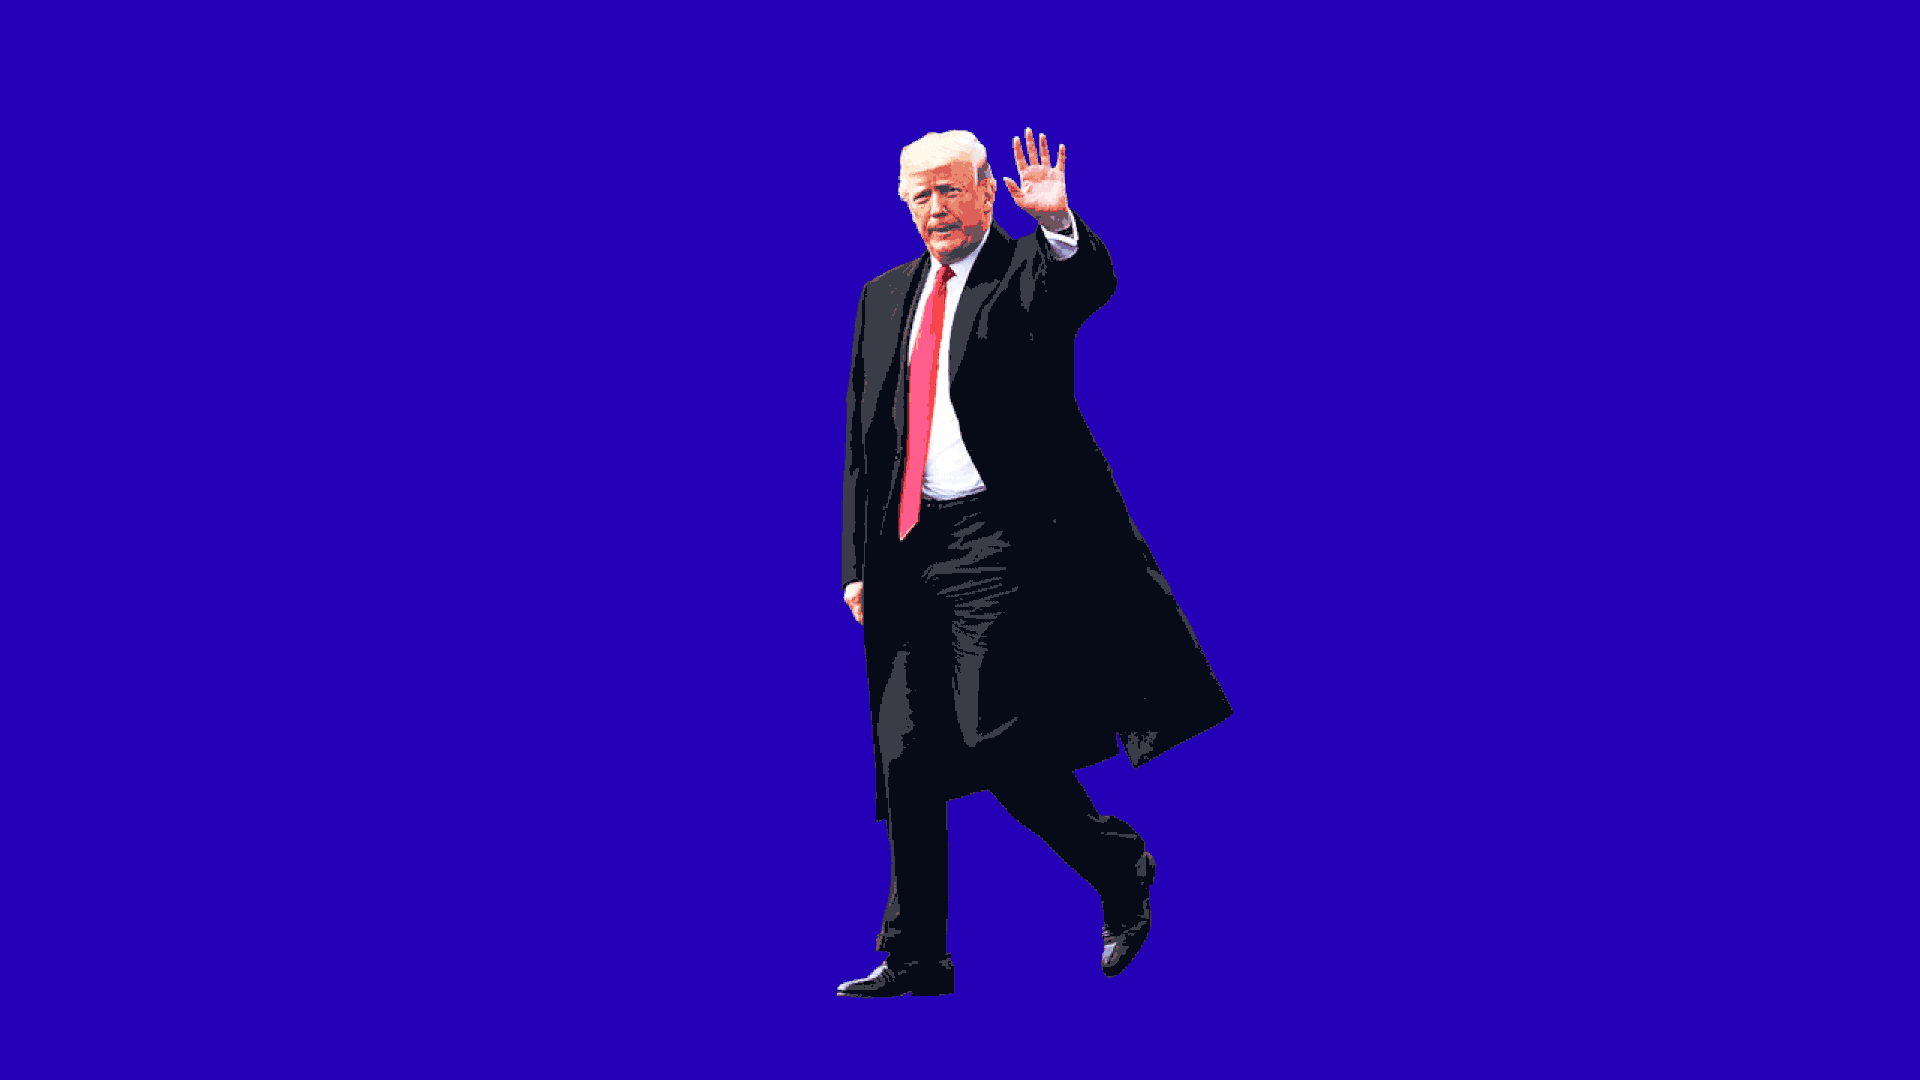 An illustrated Trump gif of hime free falling into an abyss 